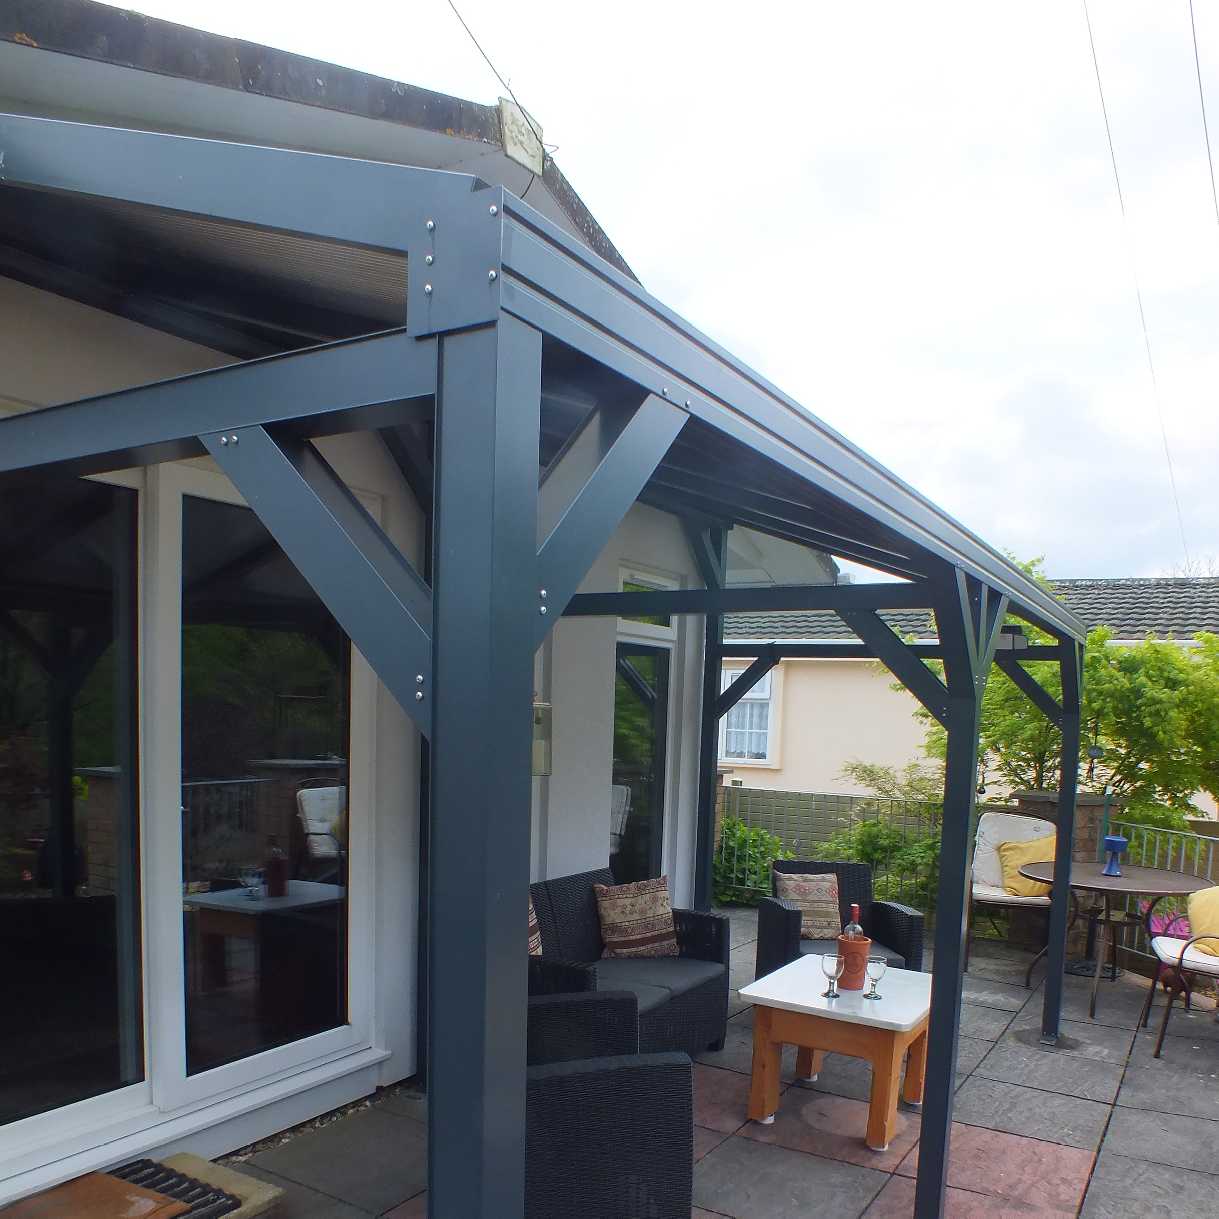 Affordable Omega Smart Free-Standing, Anthracite Grey MonoPitch Roof Canopy with 16mm Polycarbonate Glazing - 5.6m (W) x 4.0m (P), (6) Supporting Posts